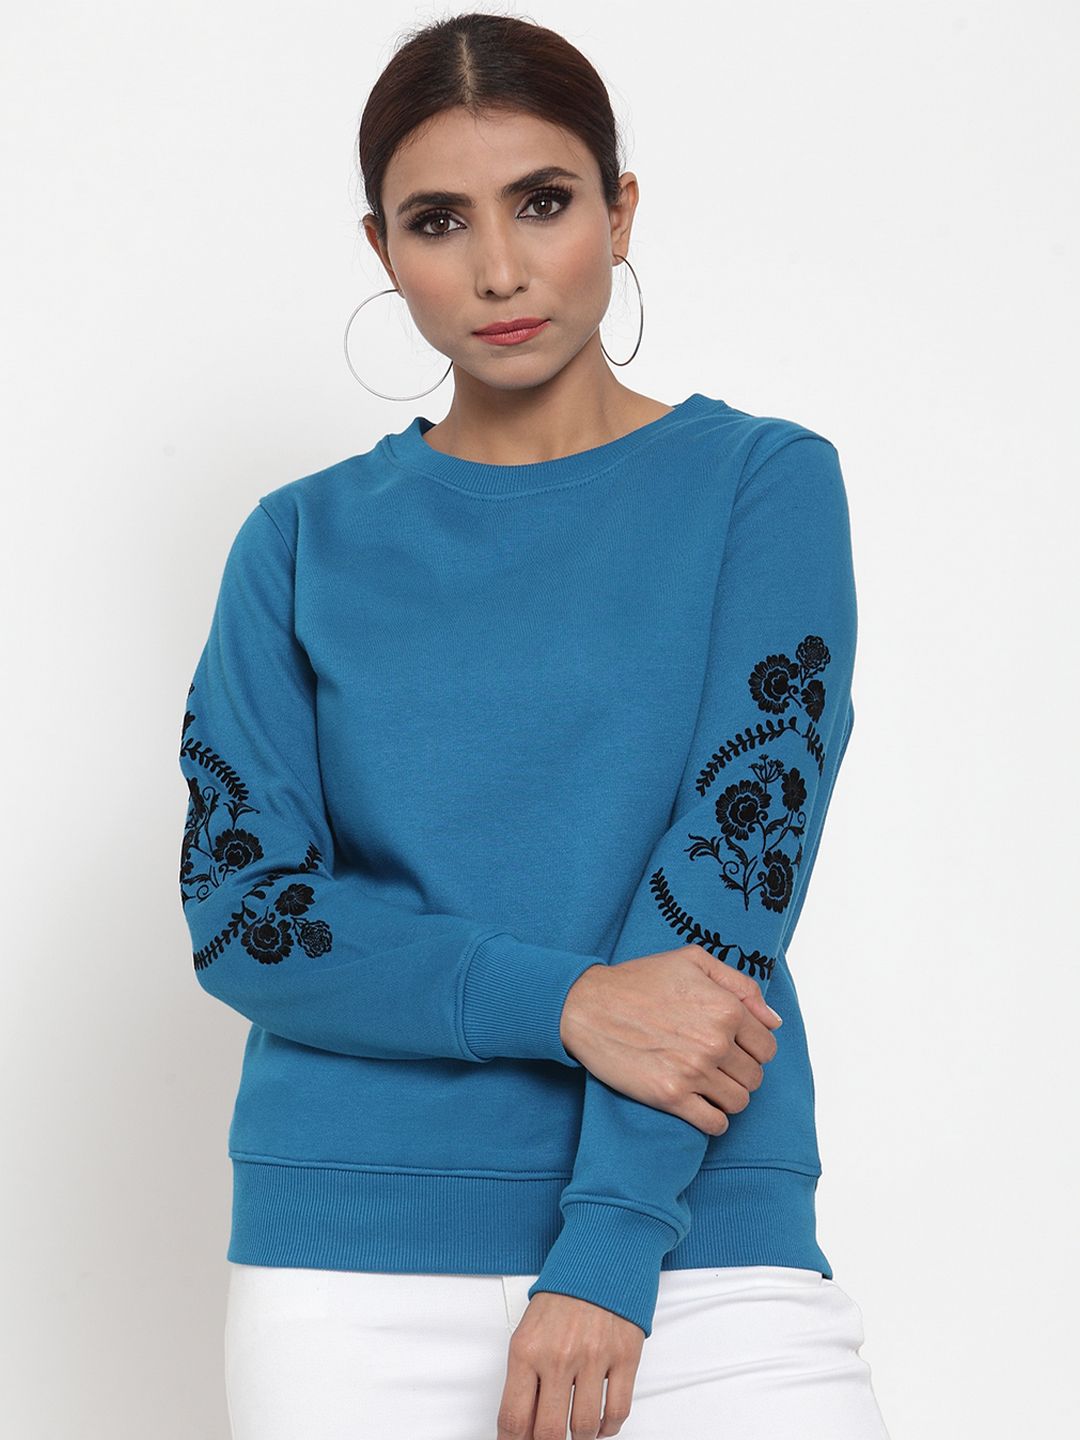 Gipsy Women Blue & Black Embroidered Sweatshirt Price in India